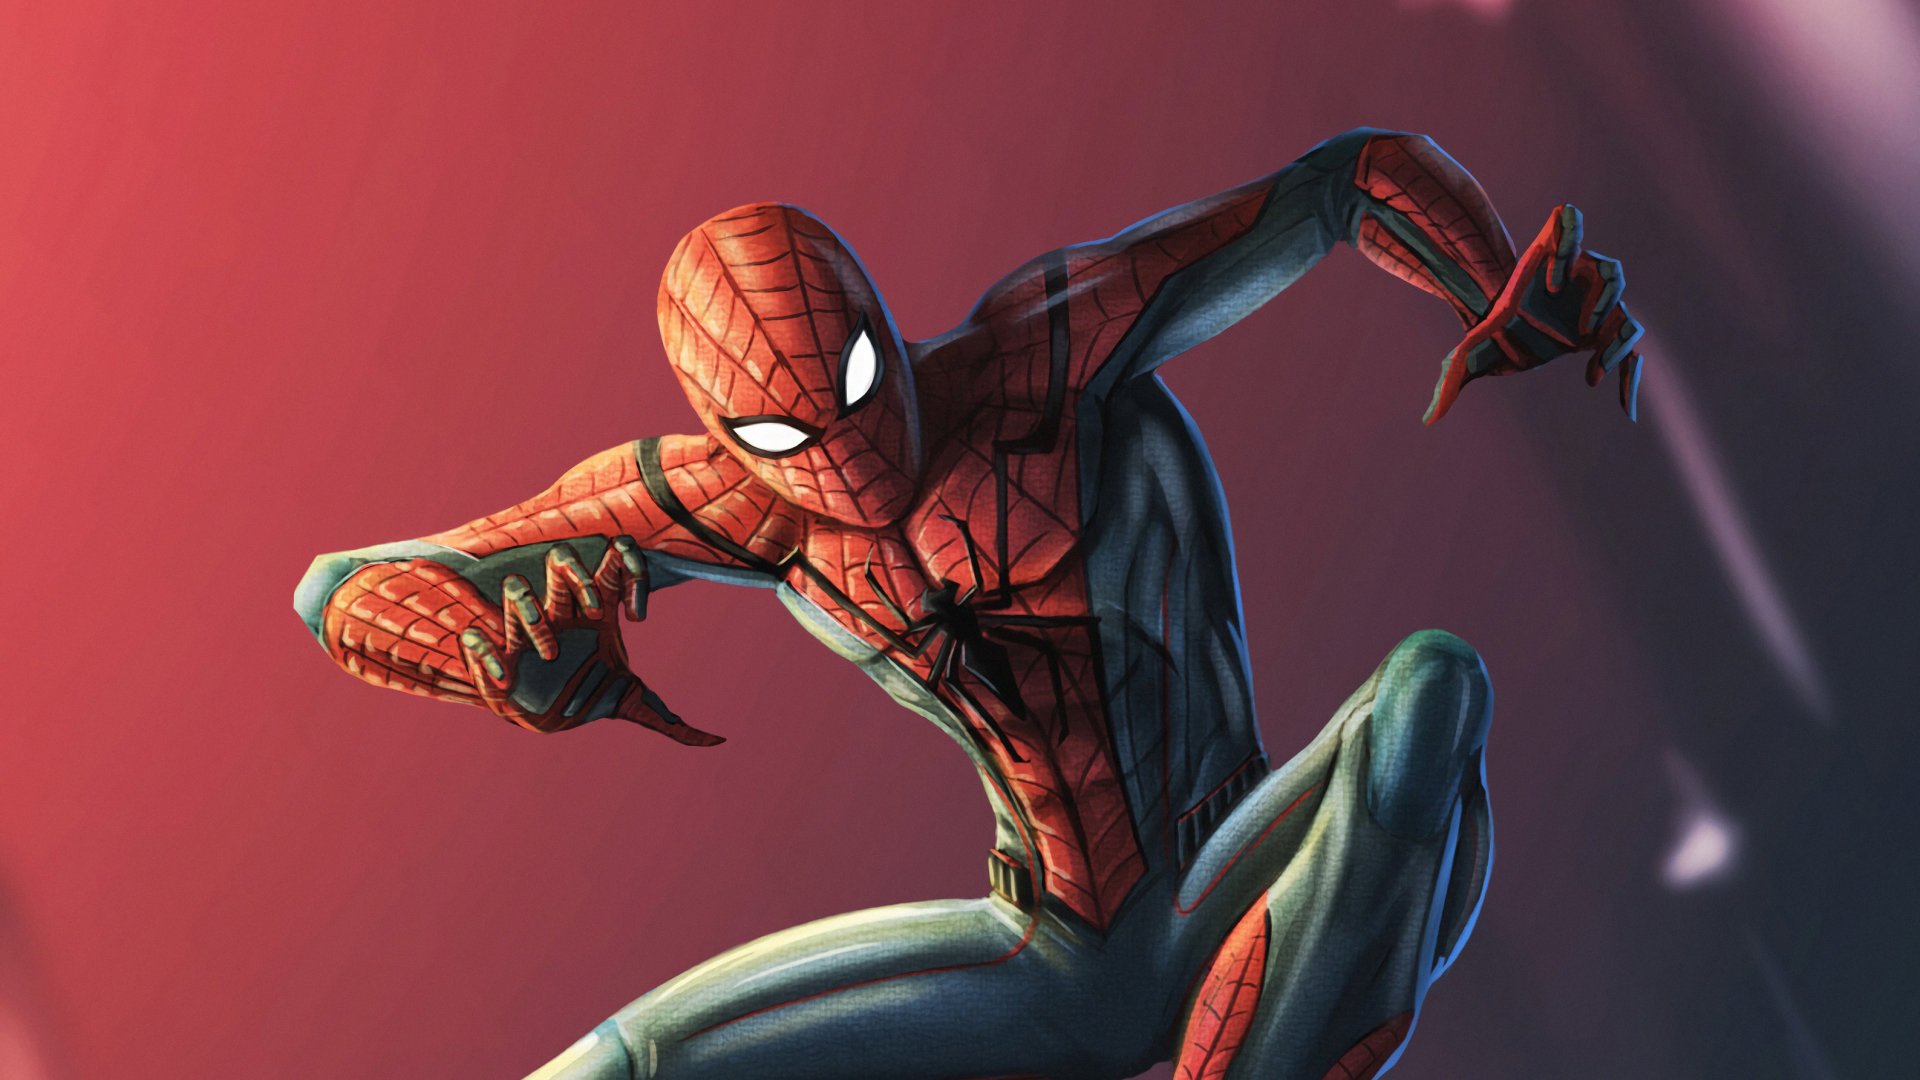 Download Peter Parker Comic Spider Man HD Wallpaper by Daniele Ariuolo